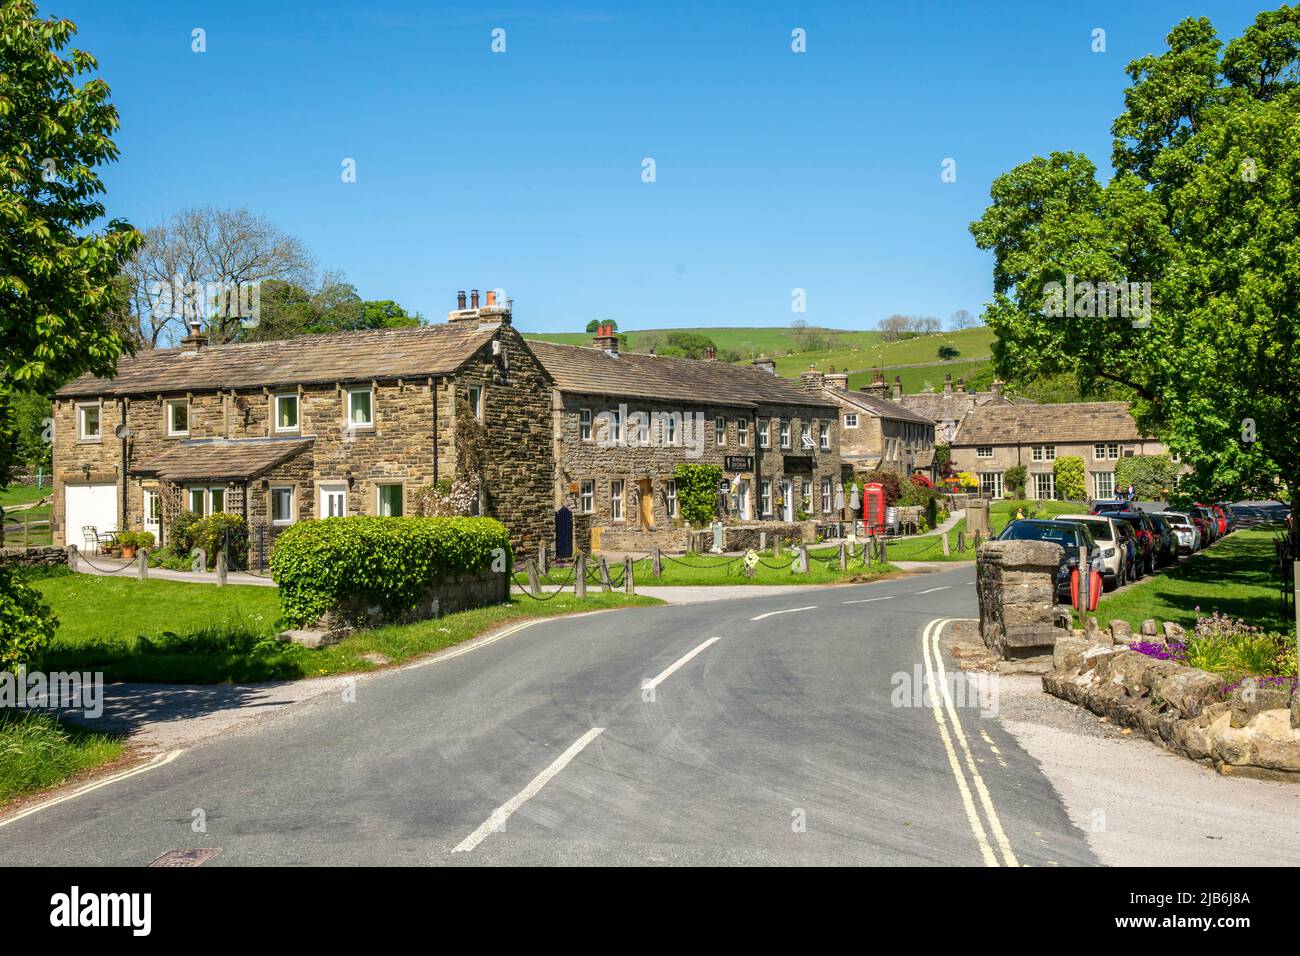 Burnsall is a village and civil parish in the Craven district of North Yorkshire, England. It is situated on the River Wharfe in Wharfedale, and is in Stock Photo